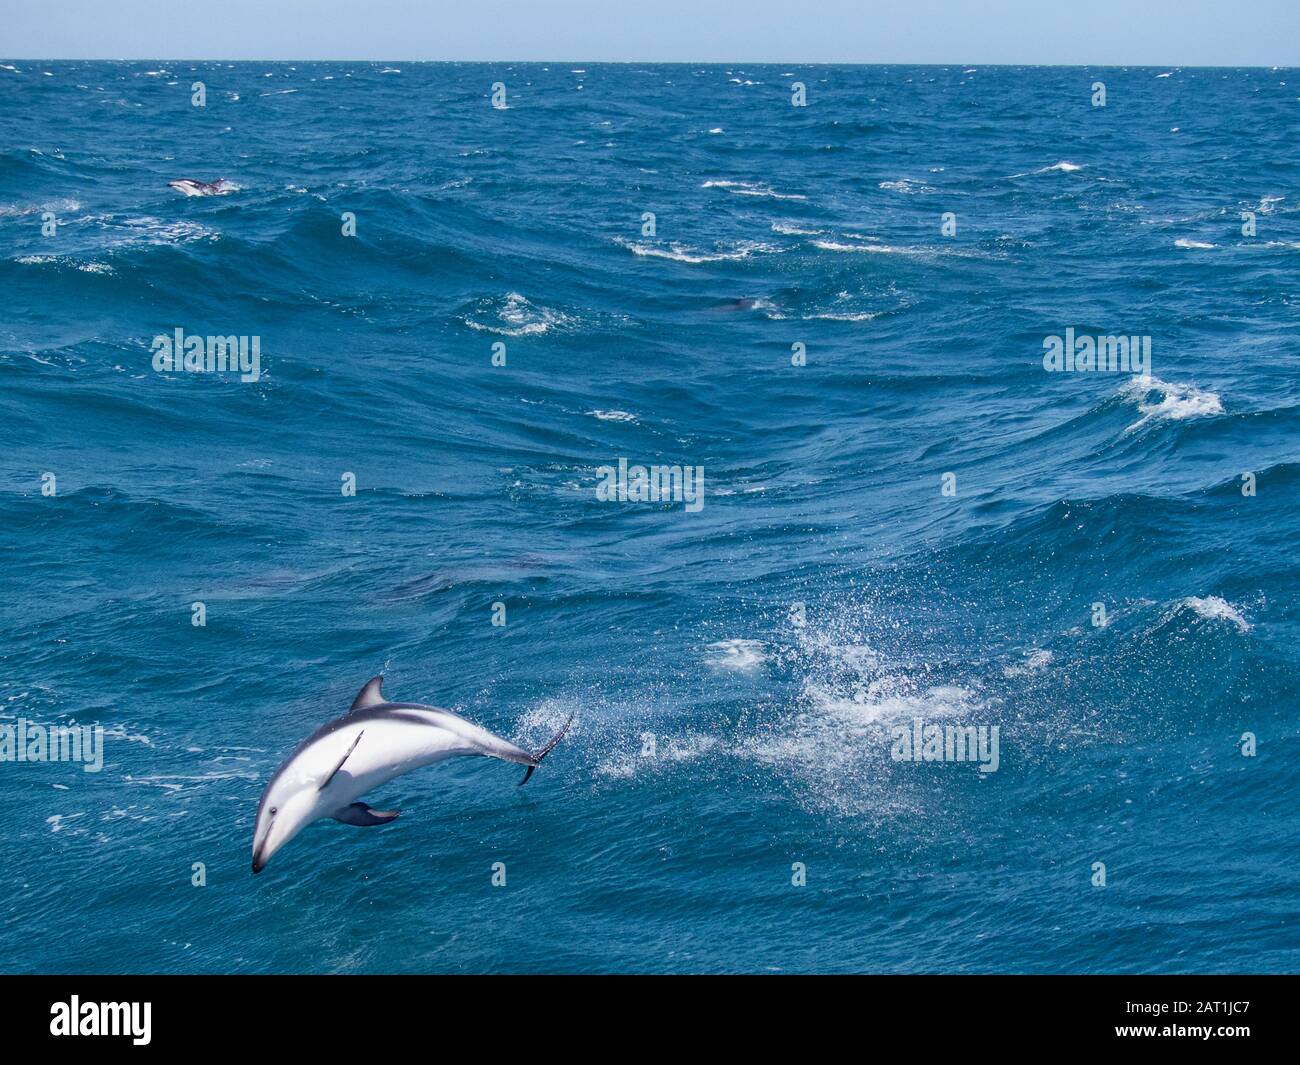 Dusky Dolphin (Lagenorhynchus obscurus) Leaping from the water in the foreground from the coast of Kaikoura in New Zealand Stock Photo